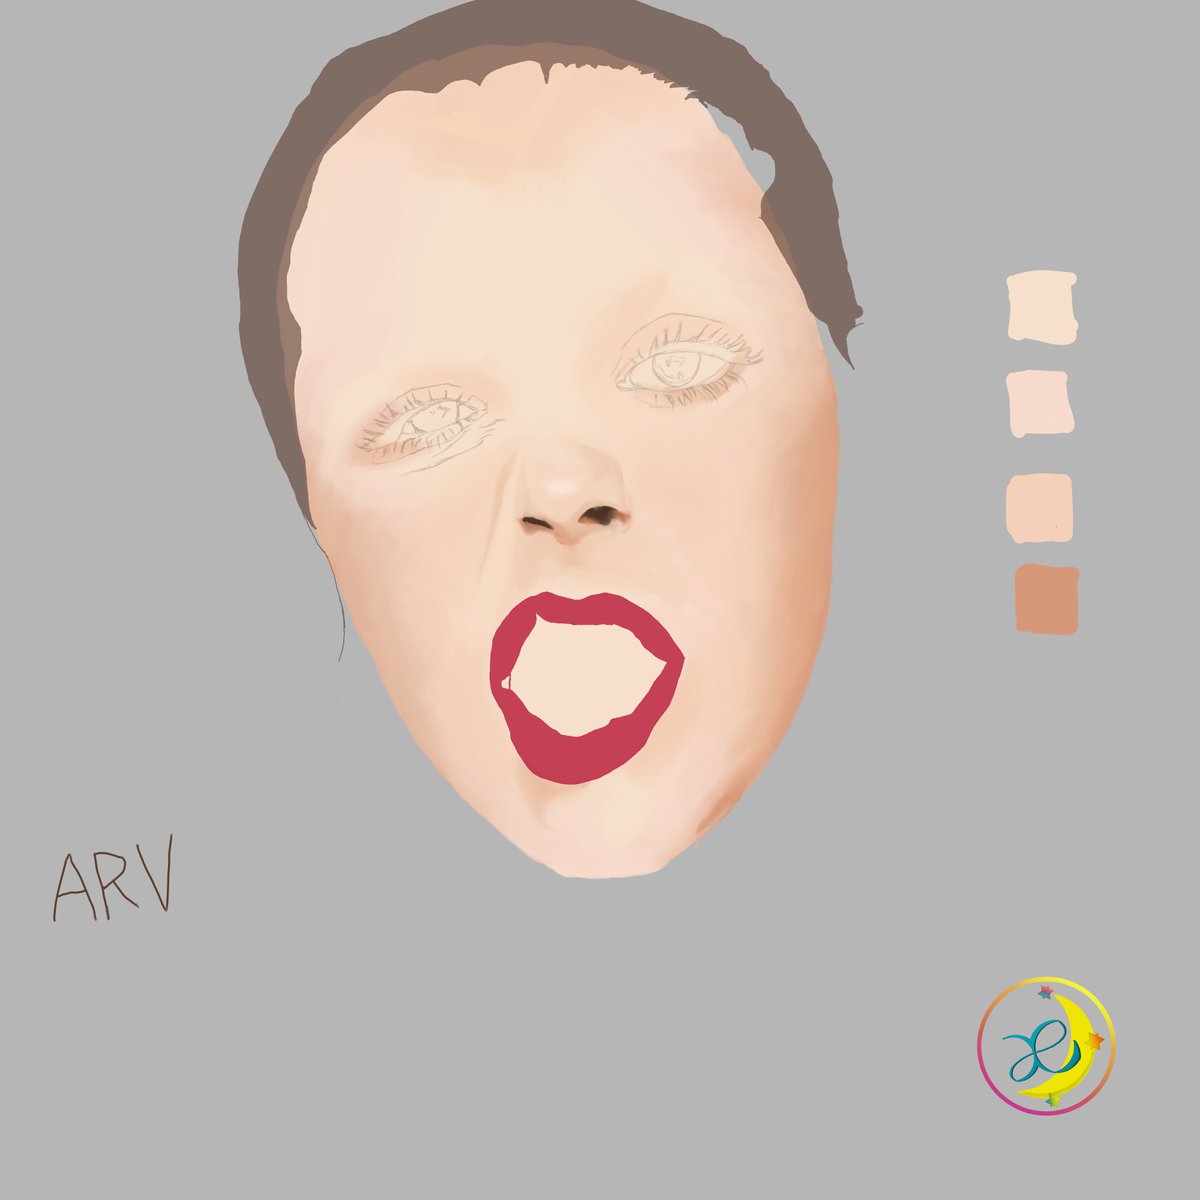 #ArtRage  
WIP#4_ARV.  Painted nose. More details needed.
Painted by ArtRage Vitae.